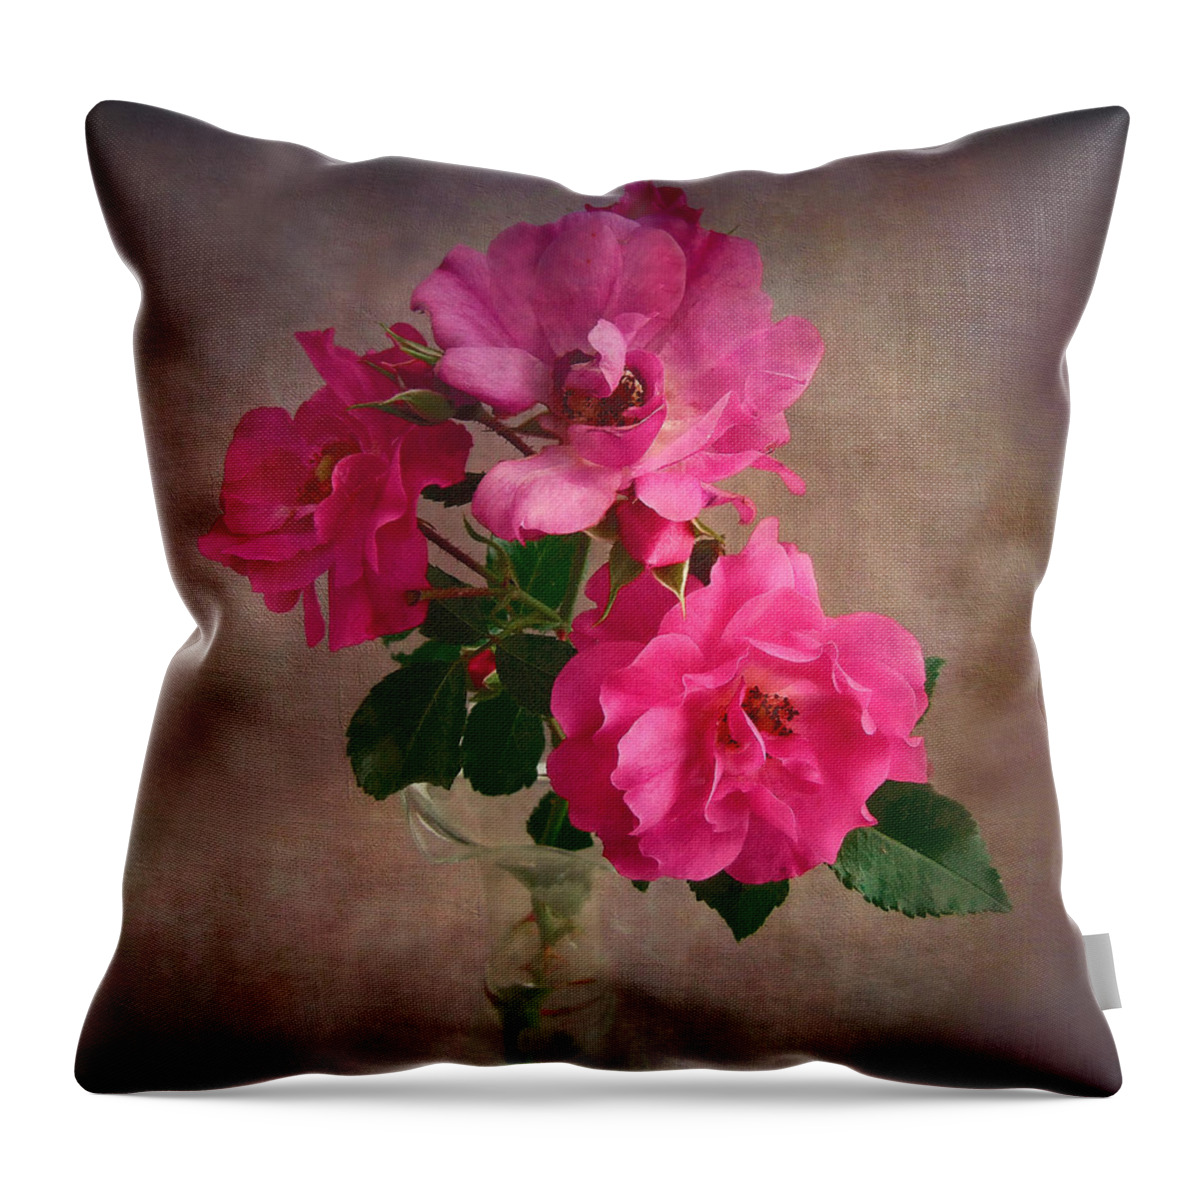 Rose Throw Pillow featuring the photograph Rose Trio Still Life by Louise Kumpf